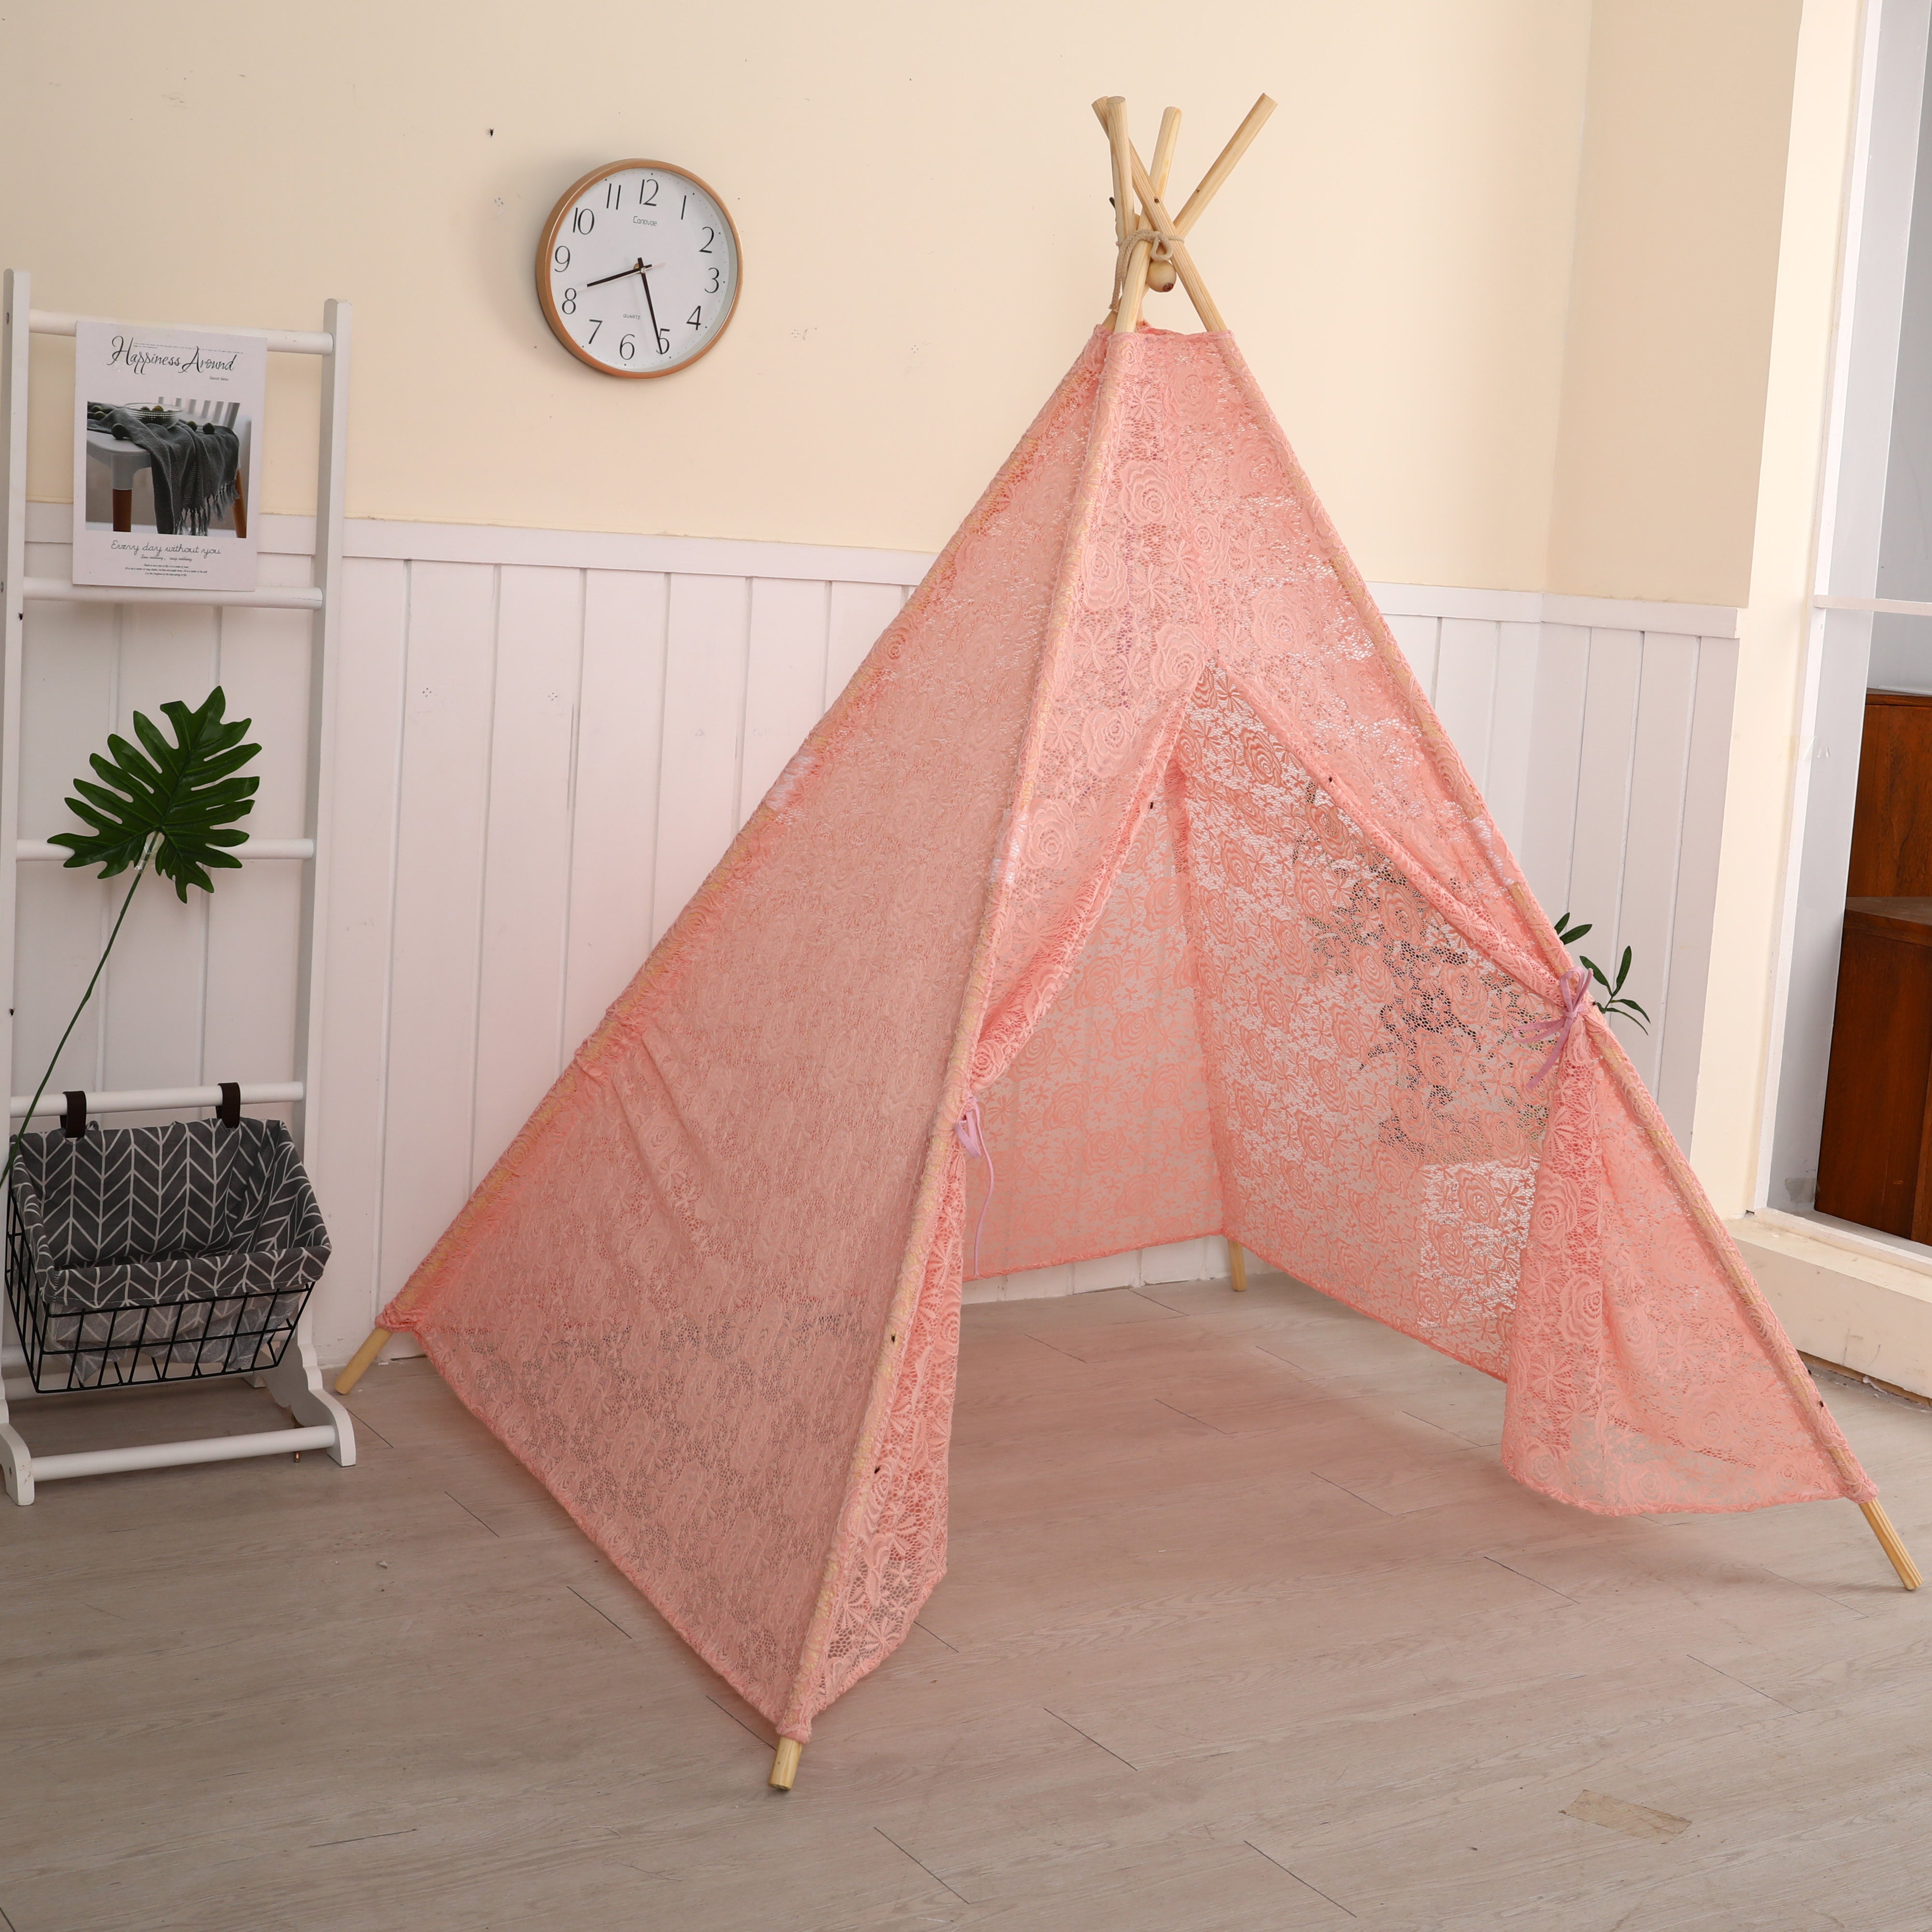 MountainSnow Indian Teepee Tent for Kids with Carry Case, Romantic Lace Teepee Play Tent, Perfect Toys for Girls and Boys, Indoor & Outdoor Playing